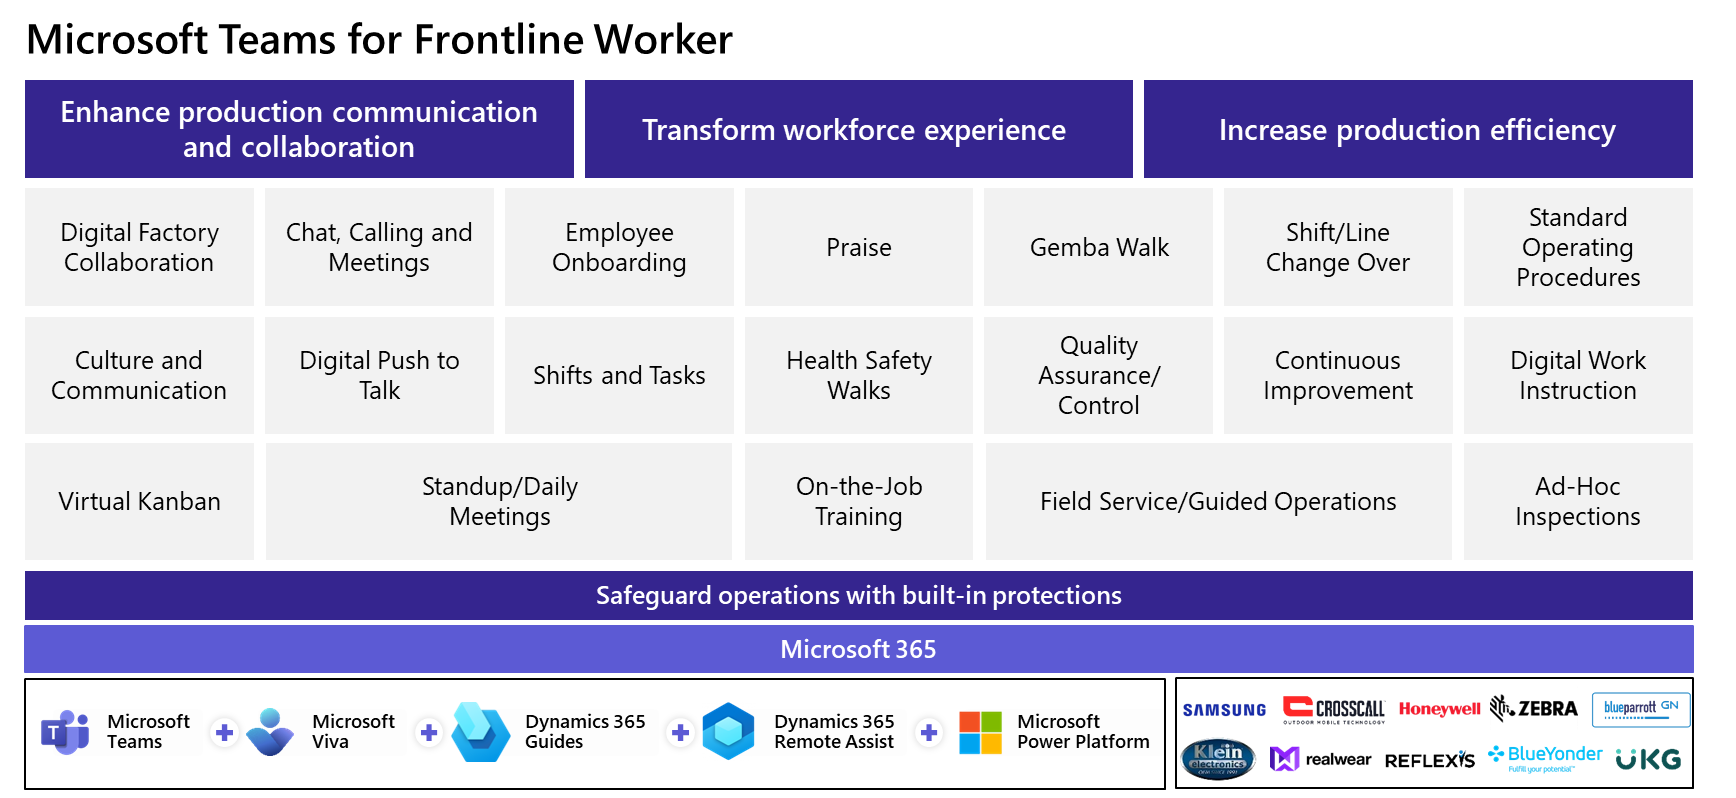 The image shows the different scenarios how Teams supports frontline workers.